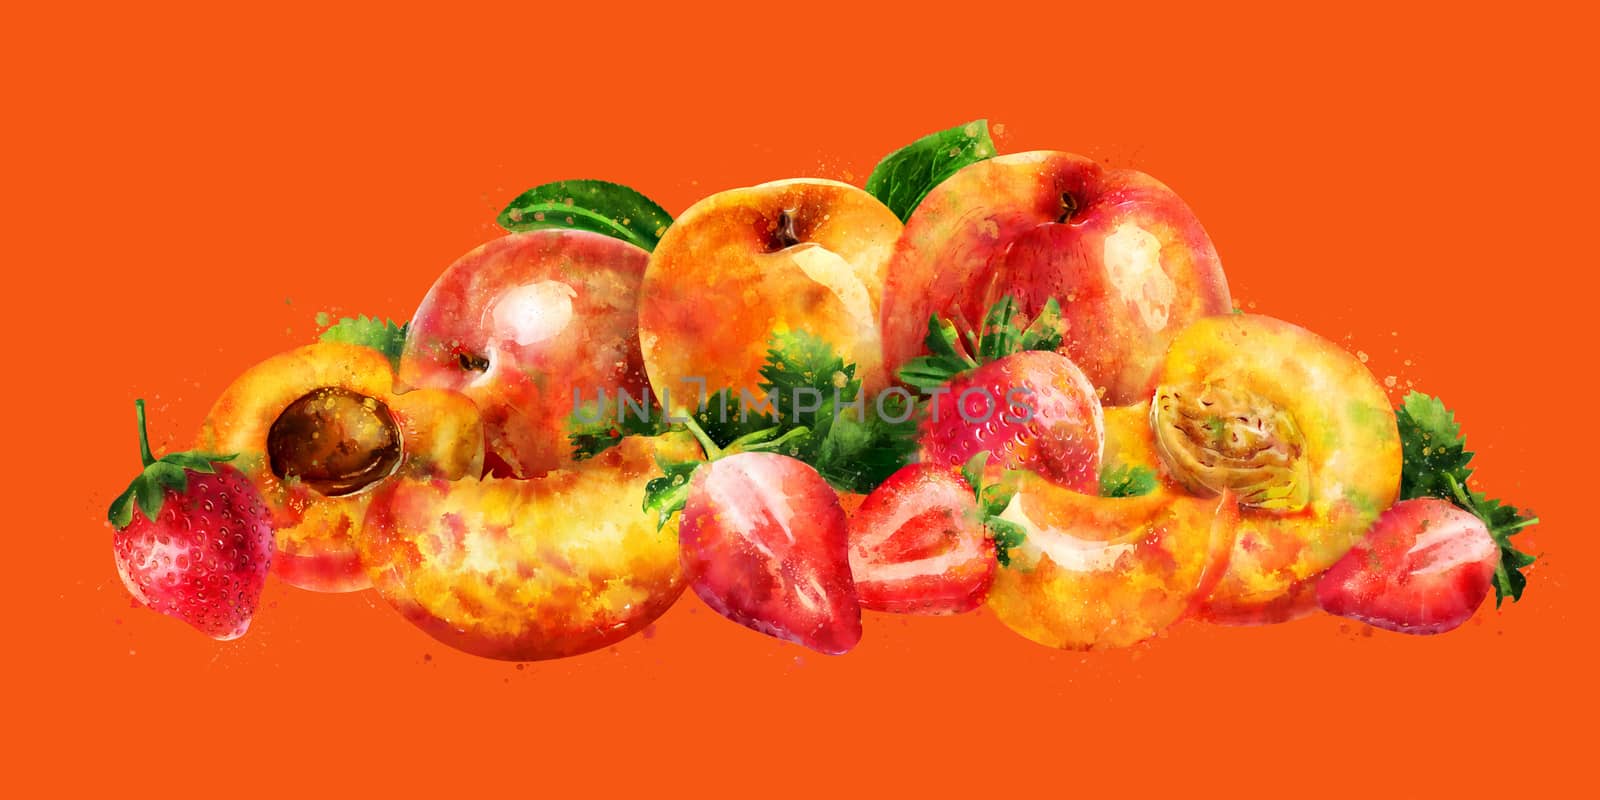 Apricot, peach and strawberry and cut slices on orange background.